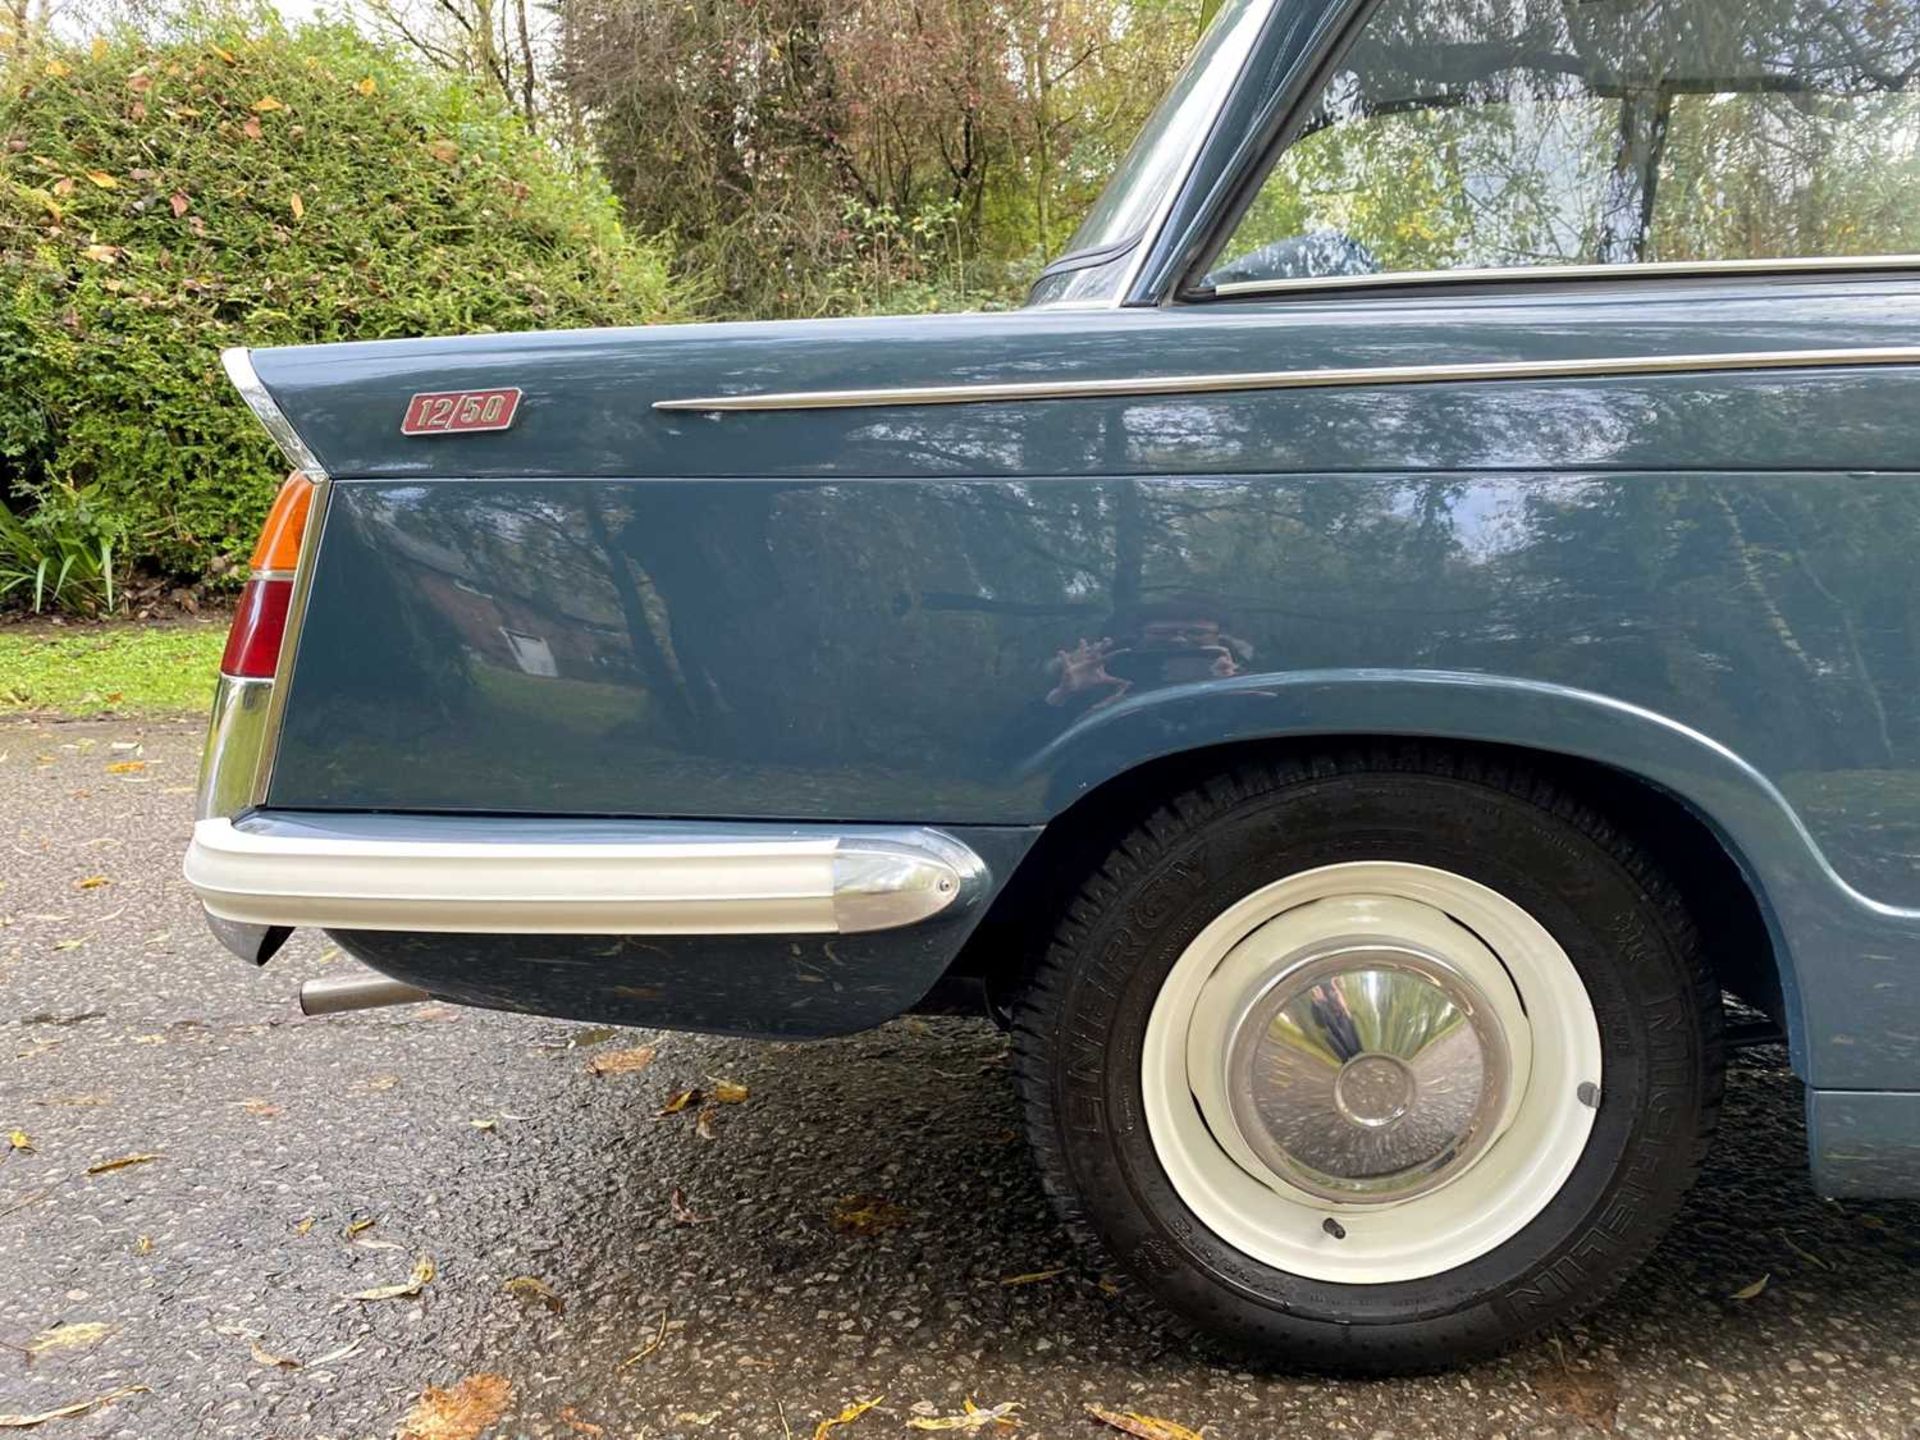 1967 Triumph Herald 12/50 *** NO RESERVE *** Subject to an extensive restoration - Image 62 of 97